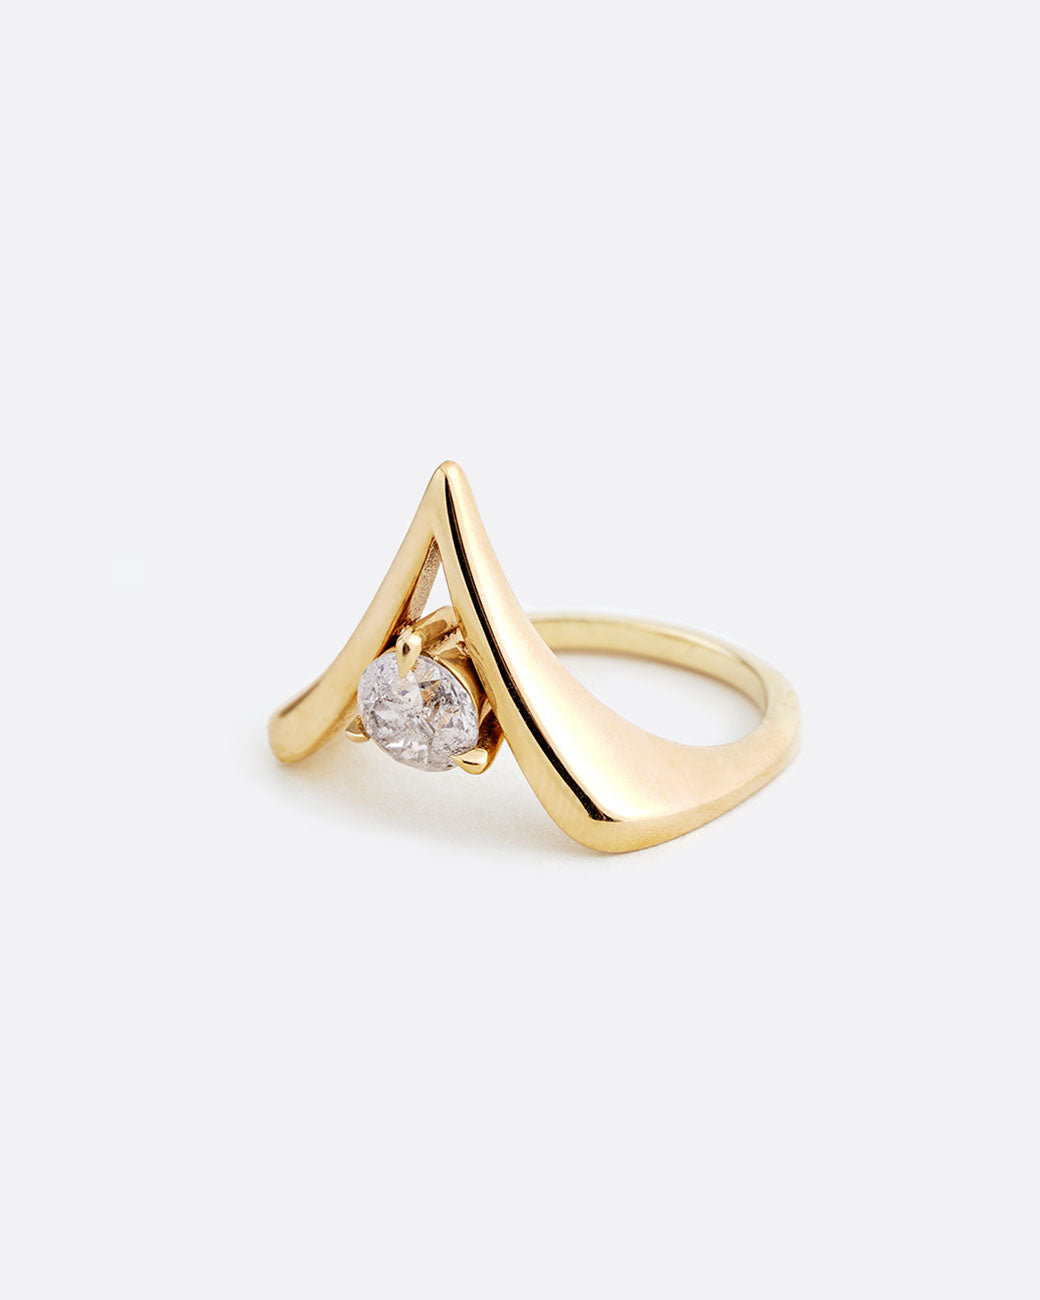 14k yellow gold V shaped ring with round diamond by Maggi Simpkins, shown from the side.